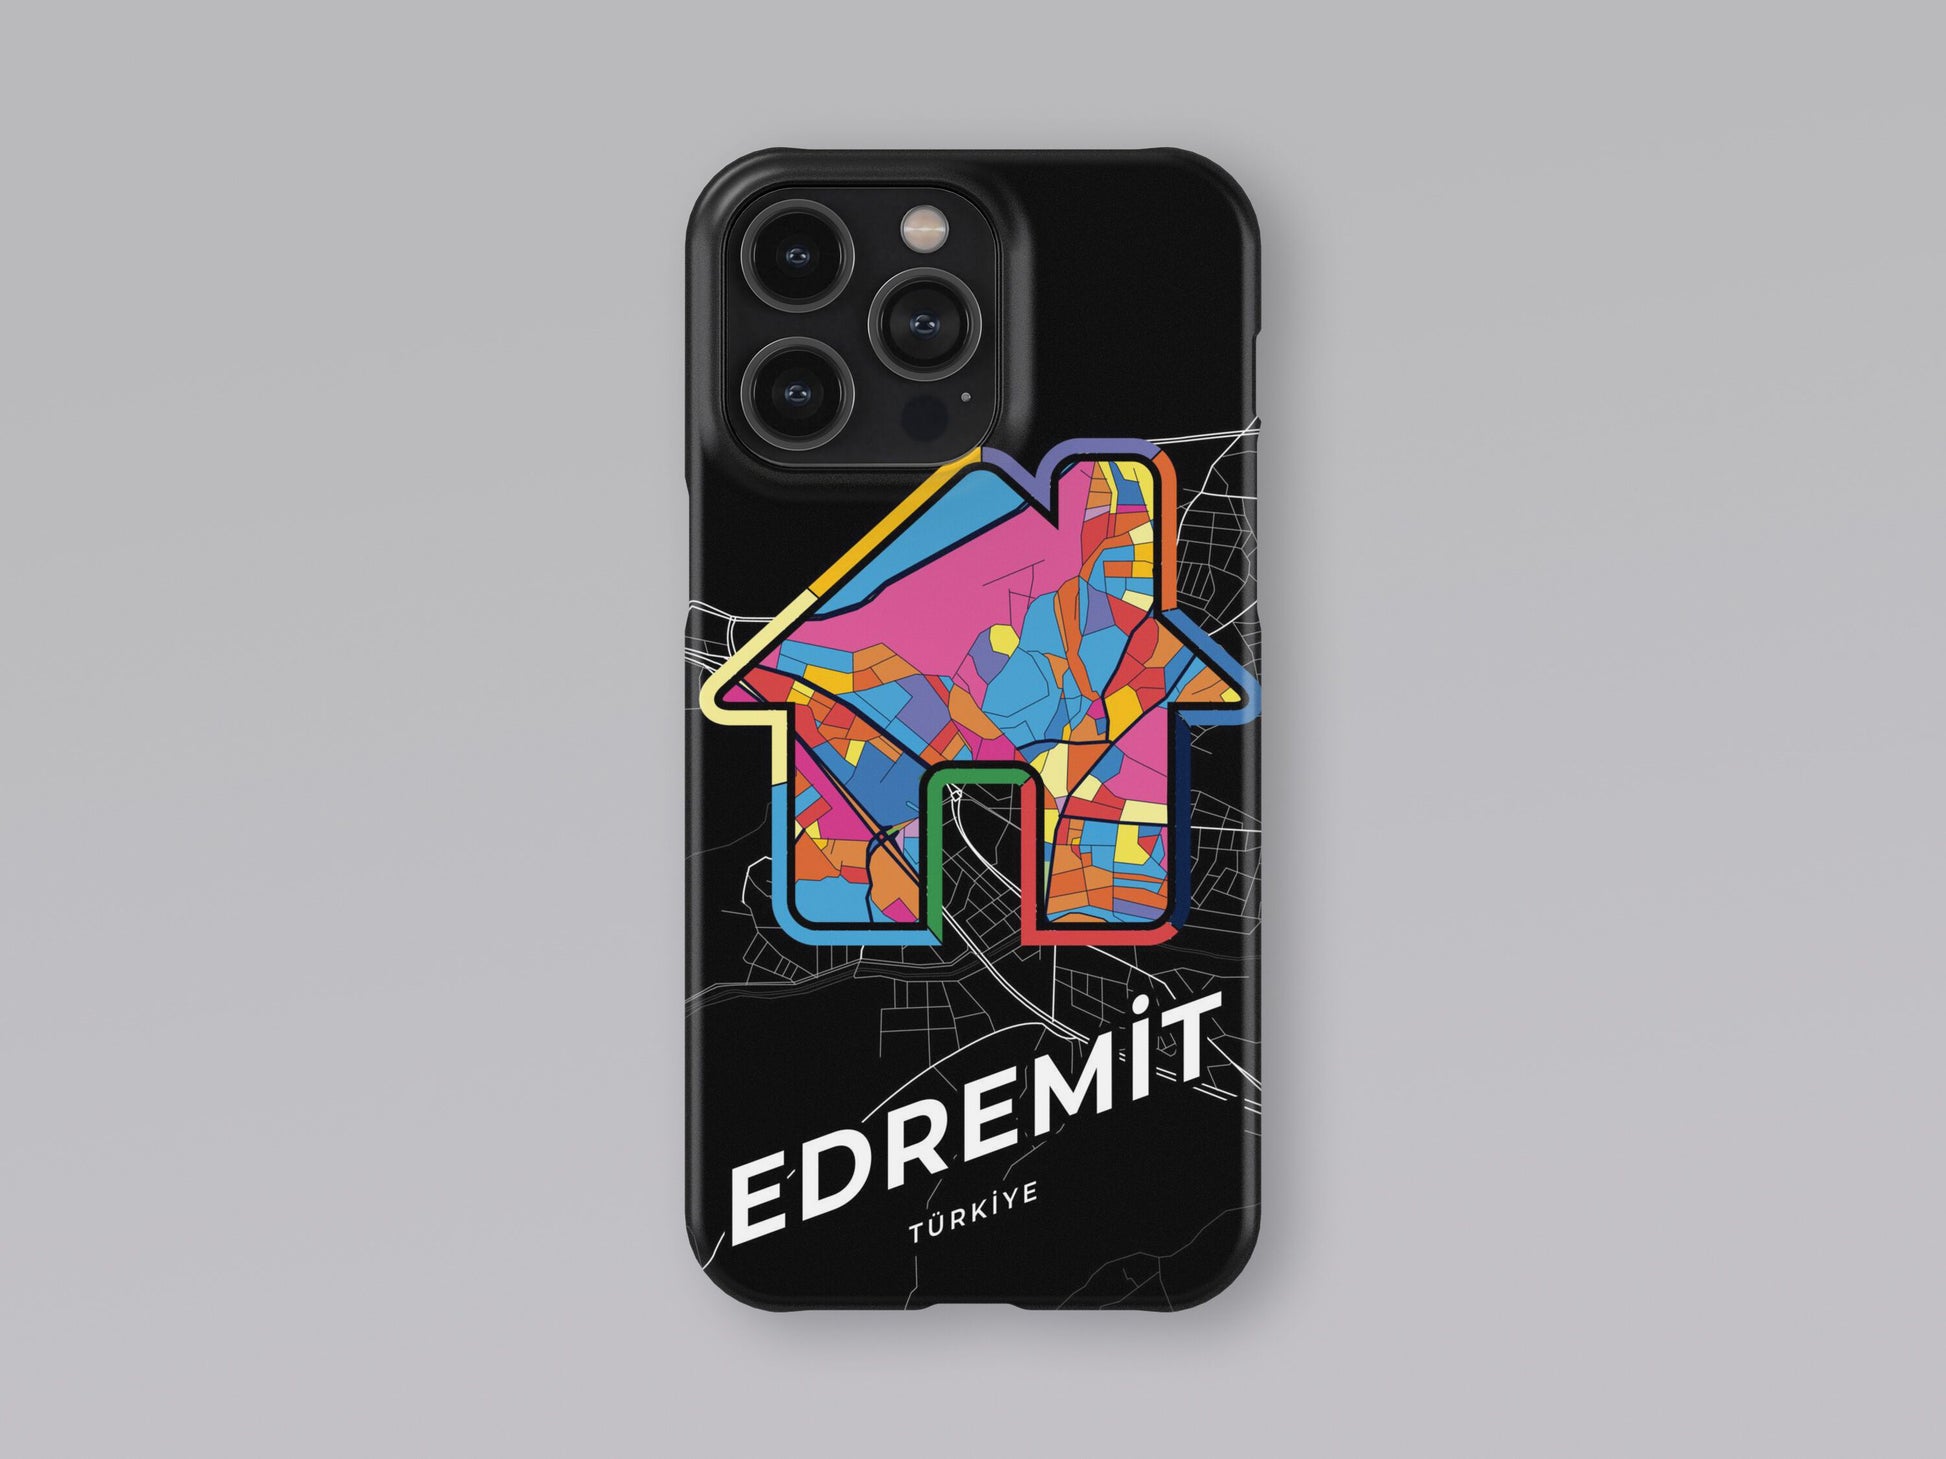 Edremit Turkey slim phone case with colorful icon. Birthday, wedding or housewarming gift. Couple match cases. 3